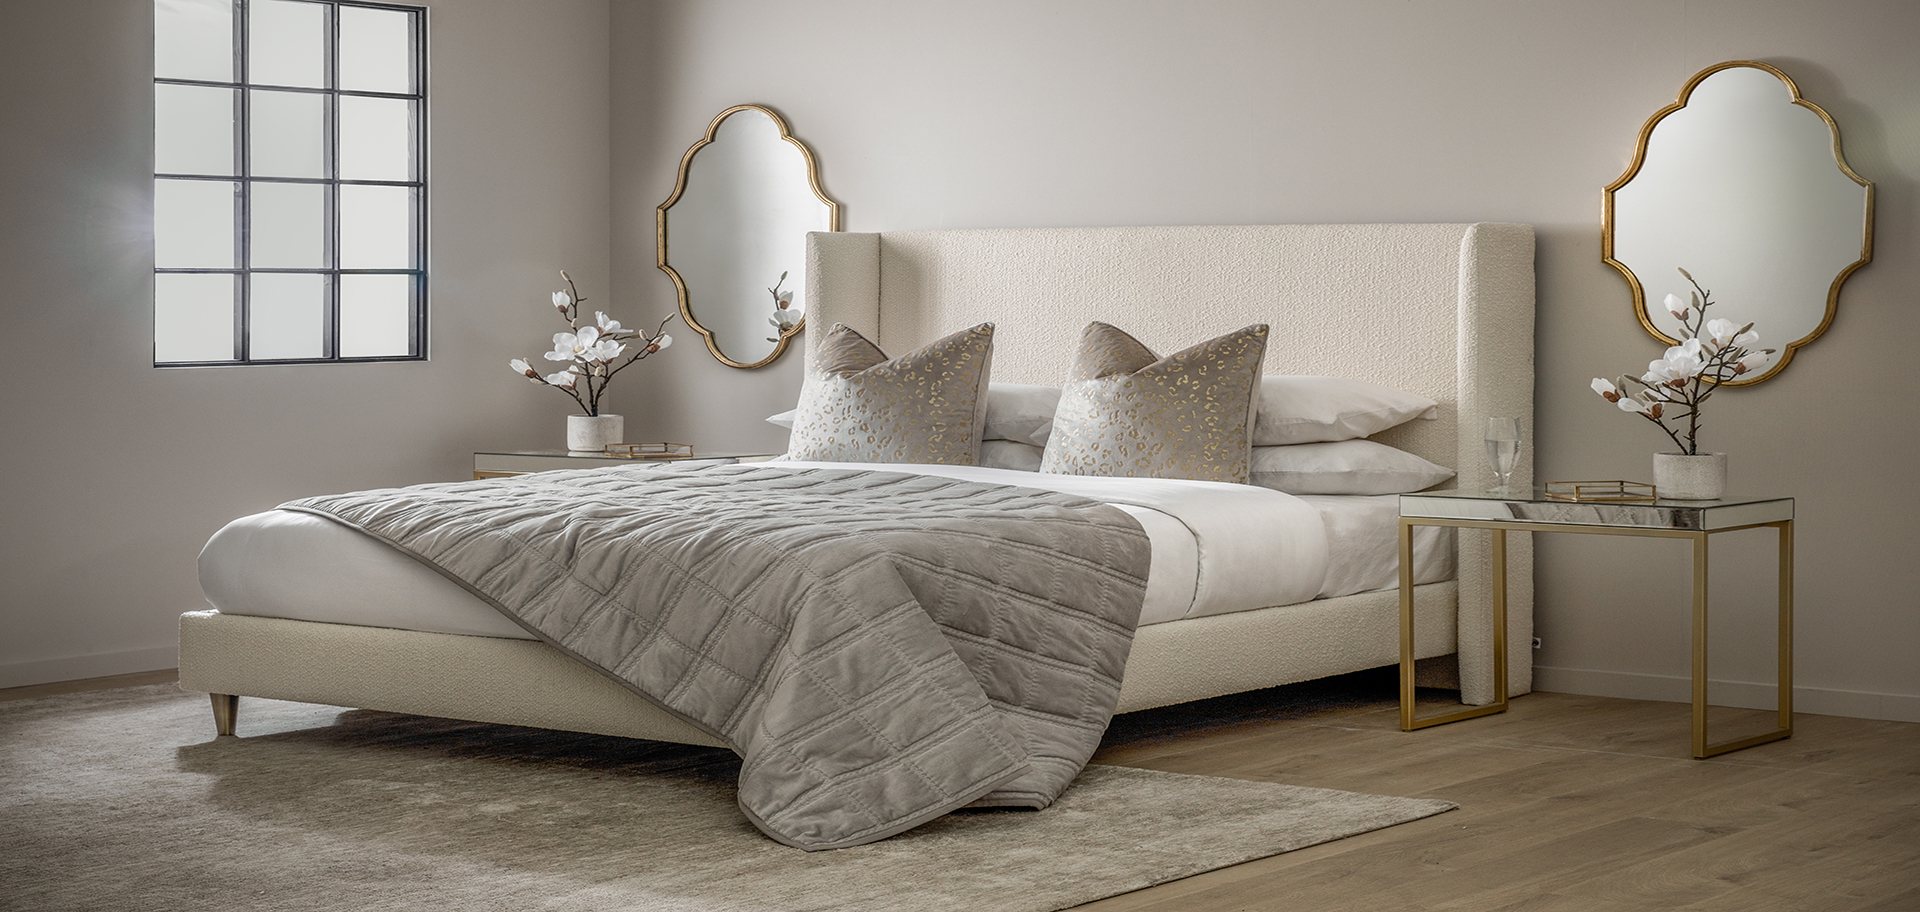 Relax & Recline on our Upholstered Bed Frames